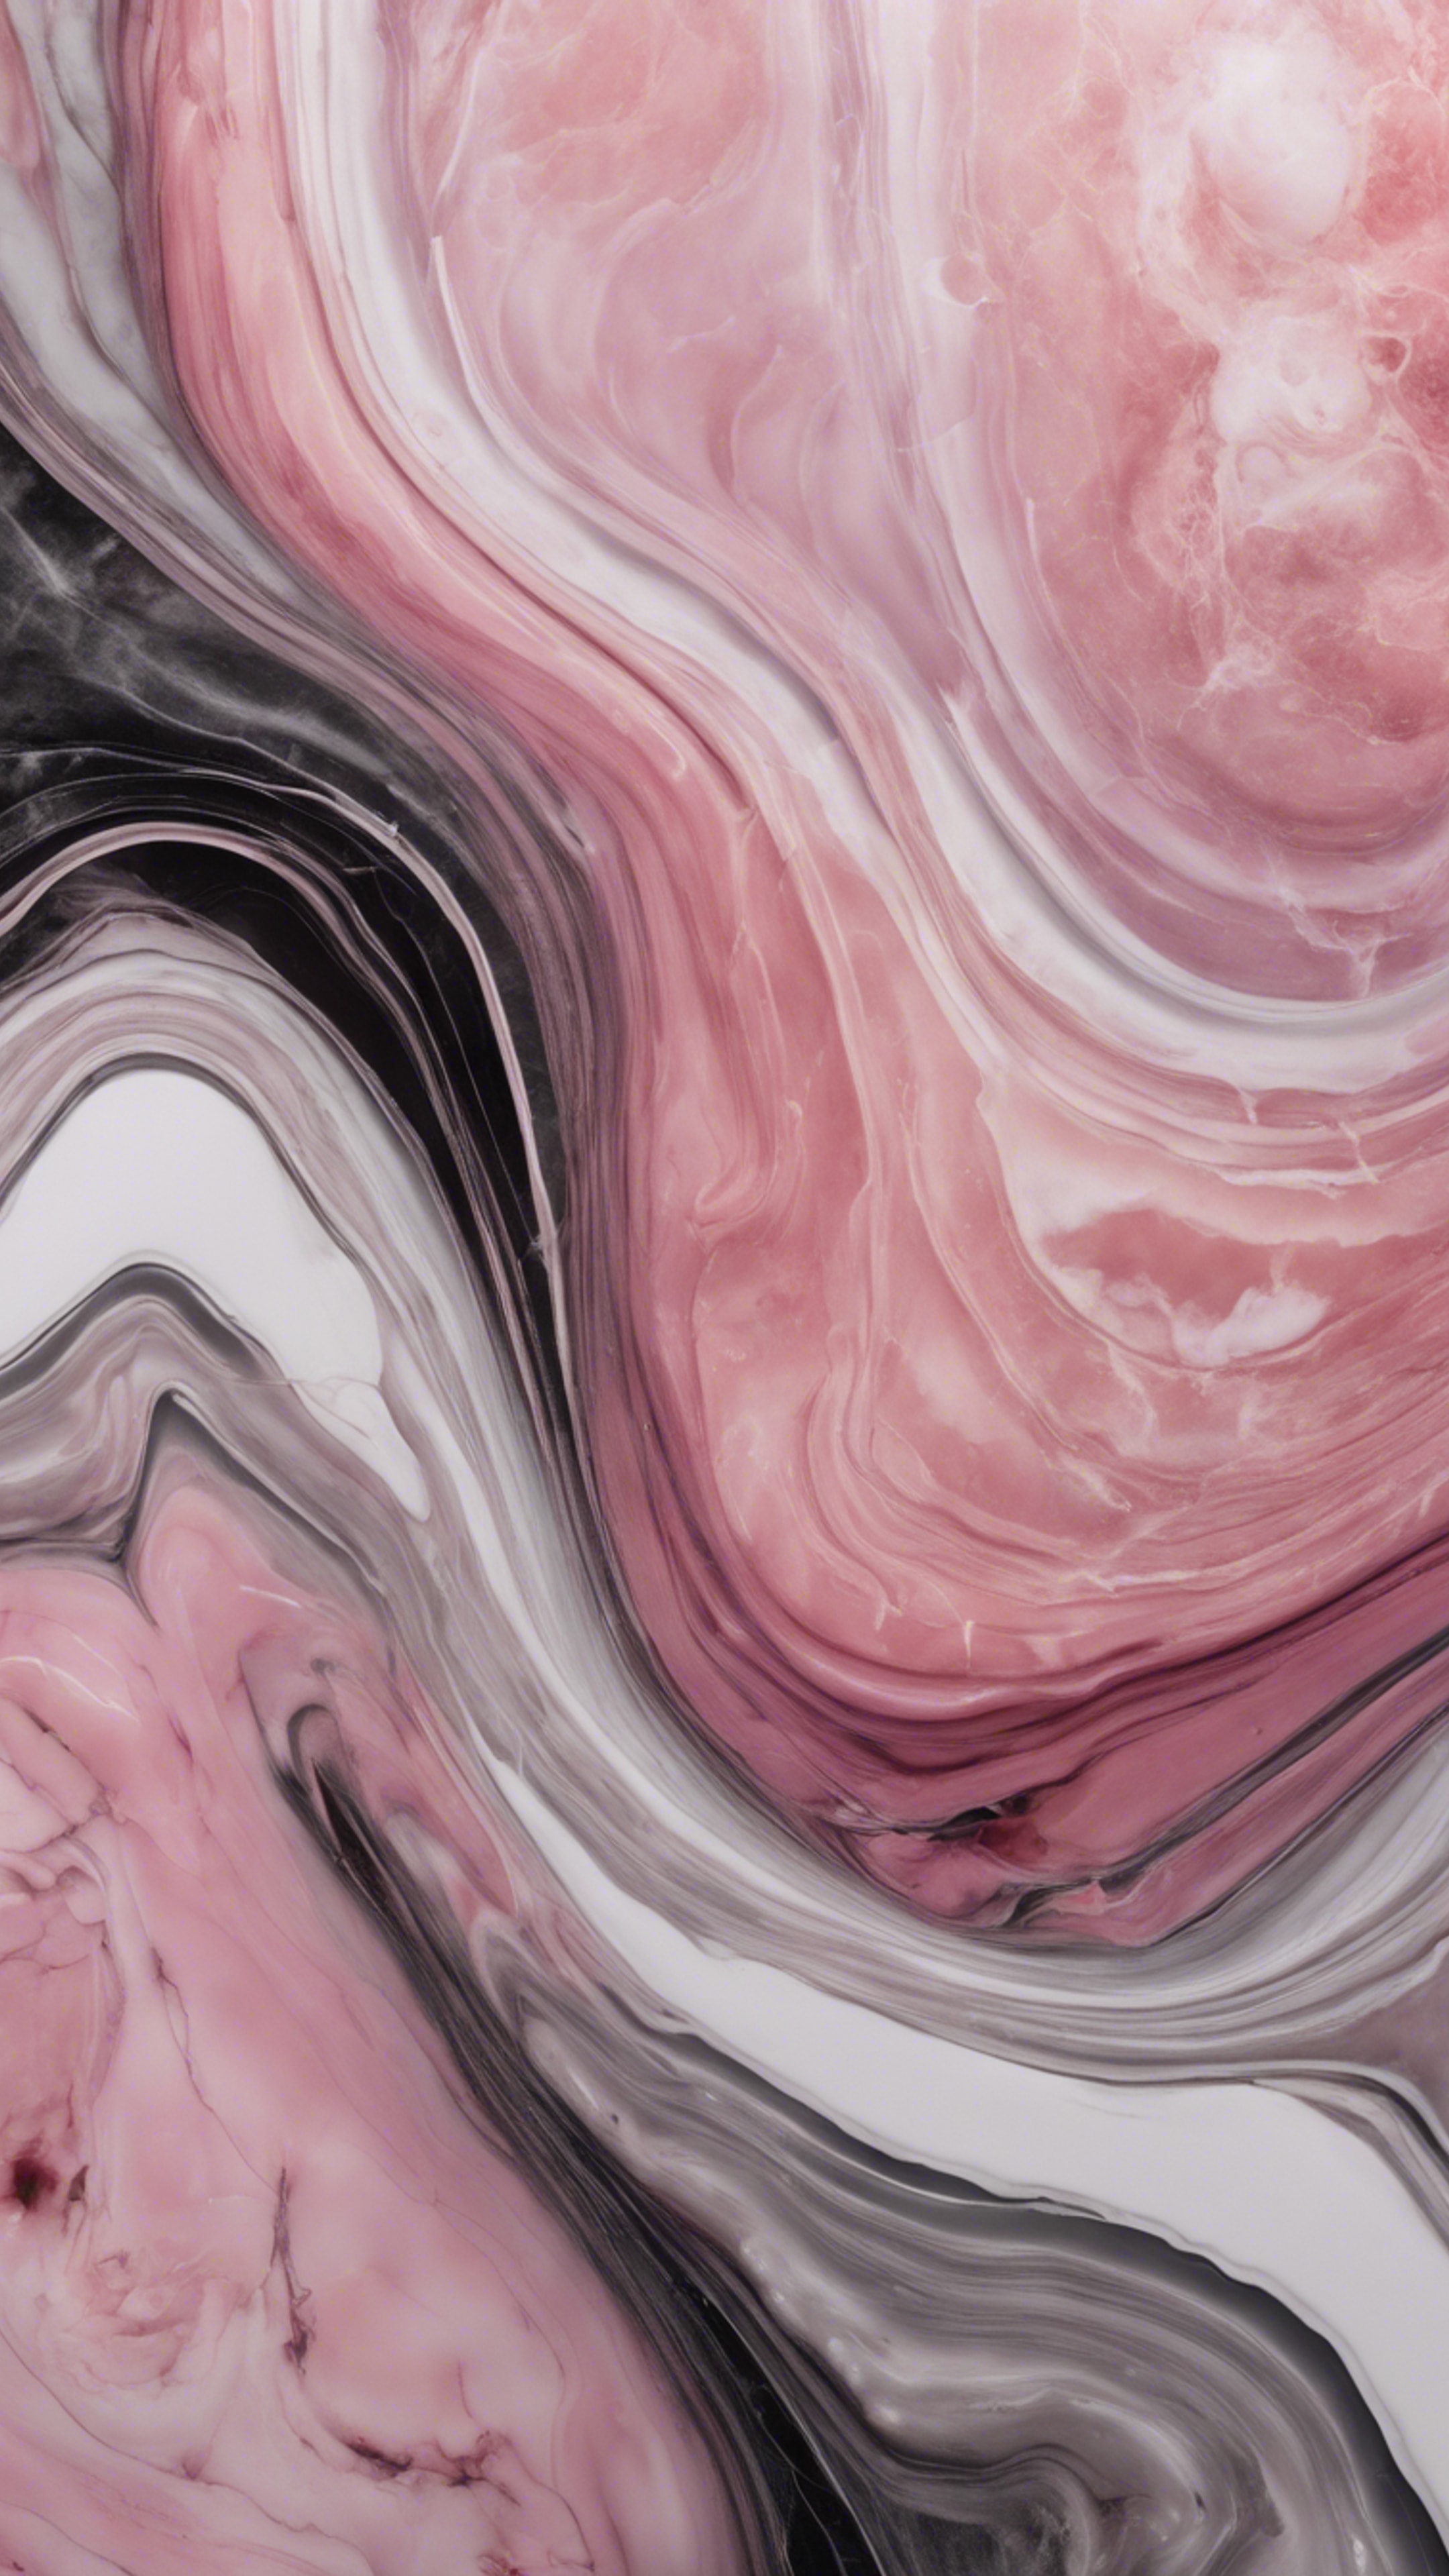 An abstract representation of pink marble, incorporating waves of deep pinks, soft whites, and dark greys. ផ្ទាំង​រូបភាព[5ac081f457bf4dc8ac1f]